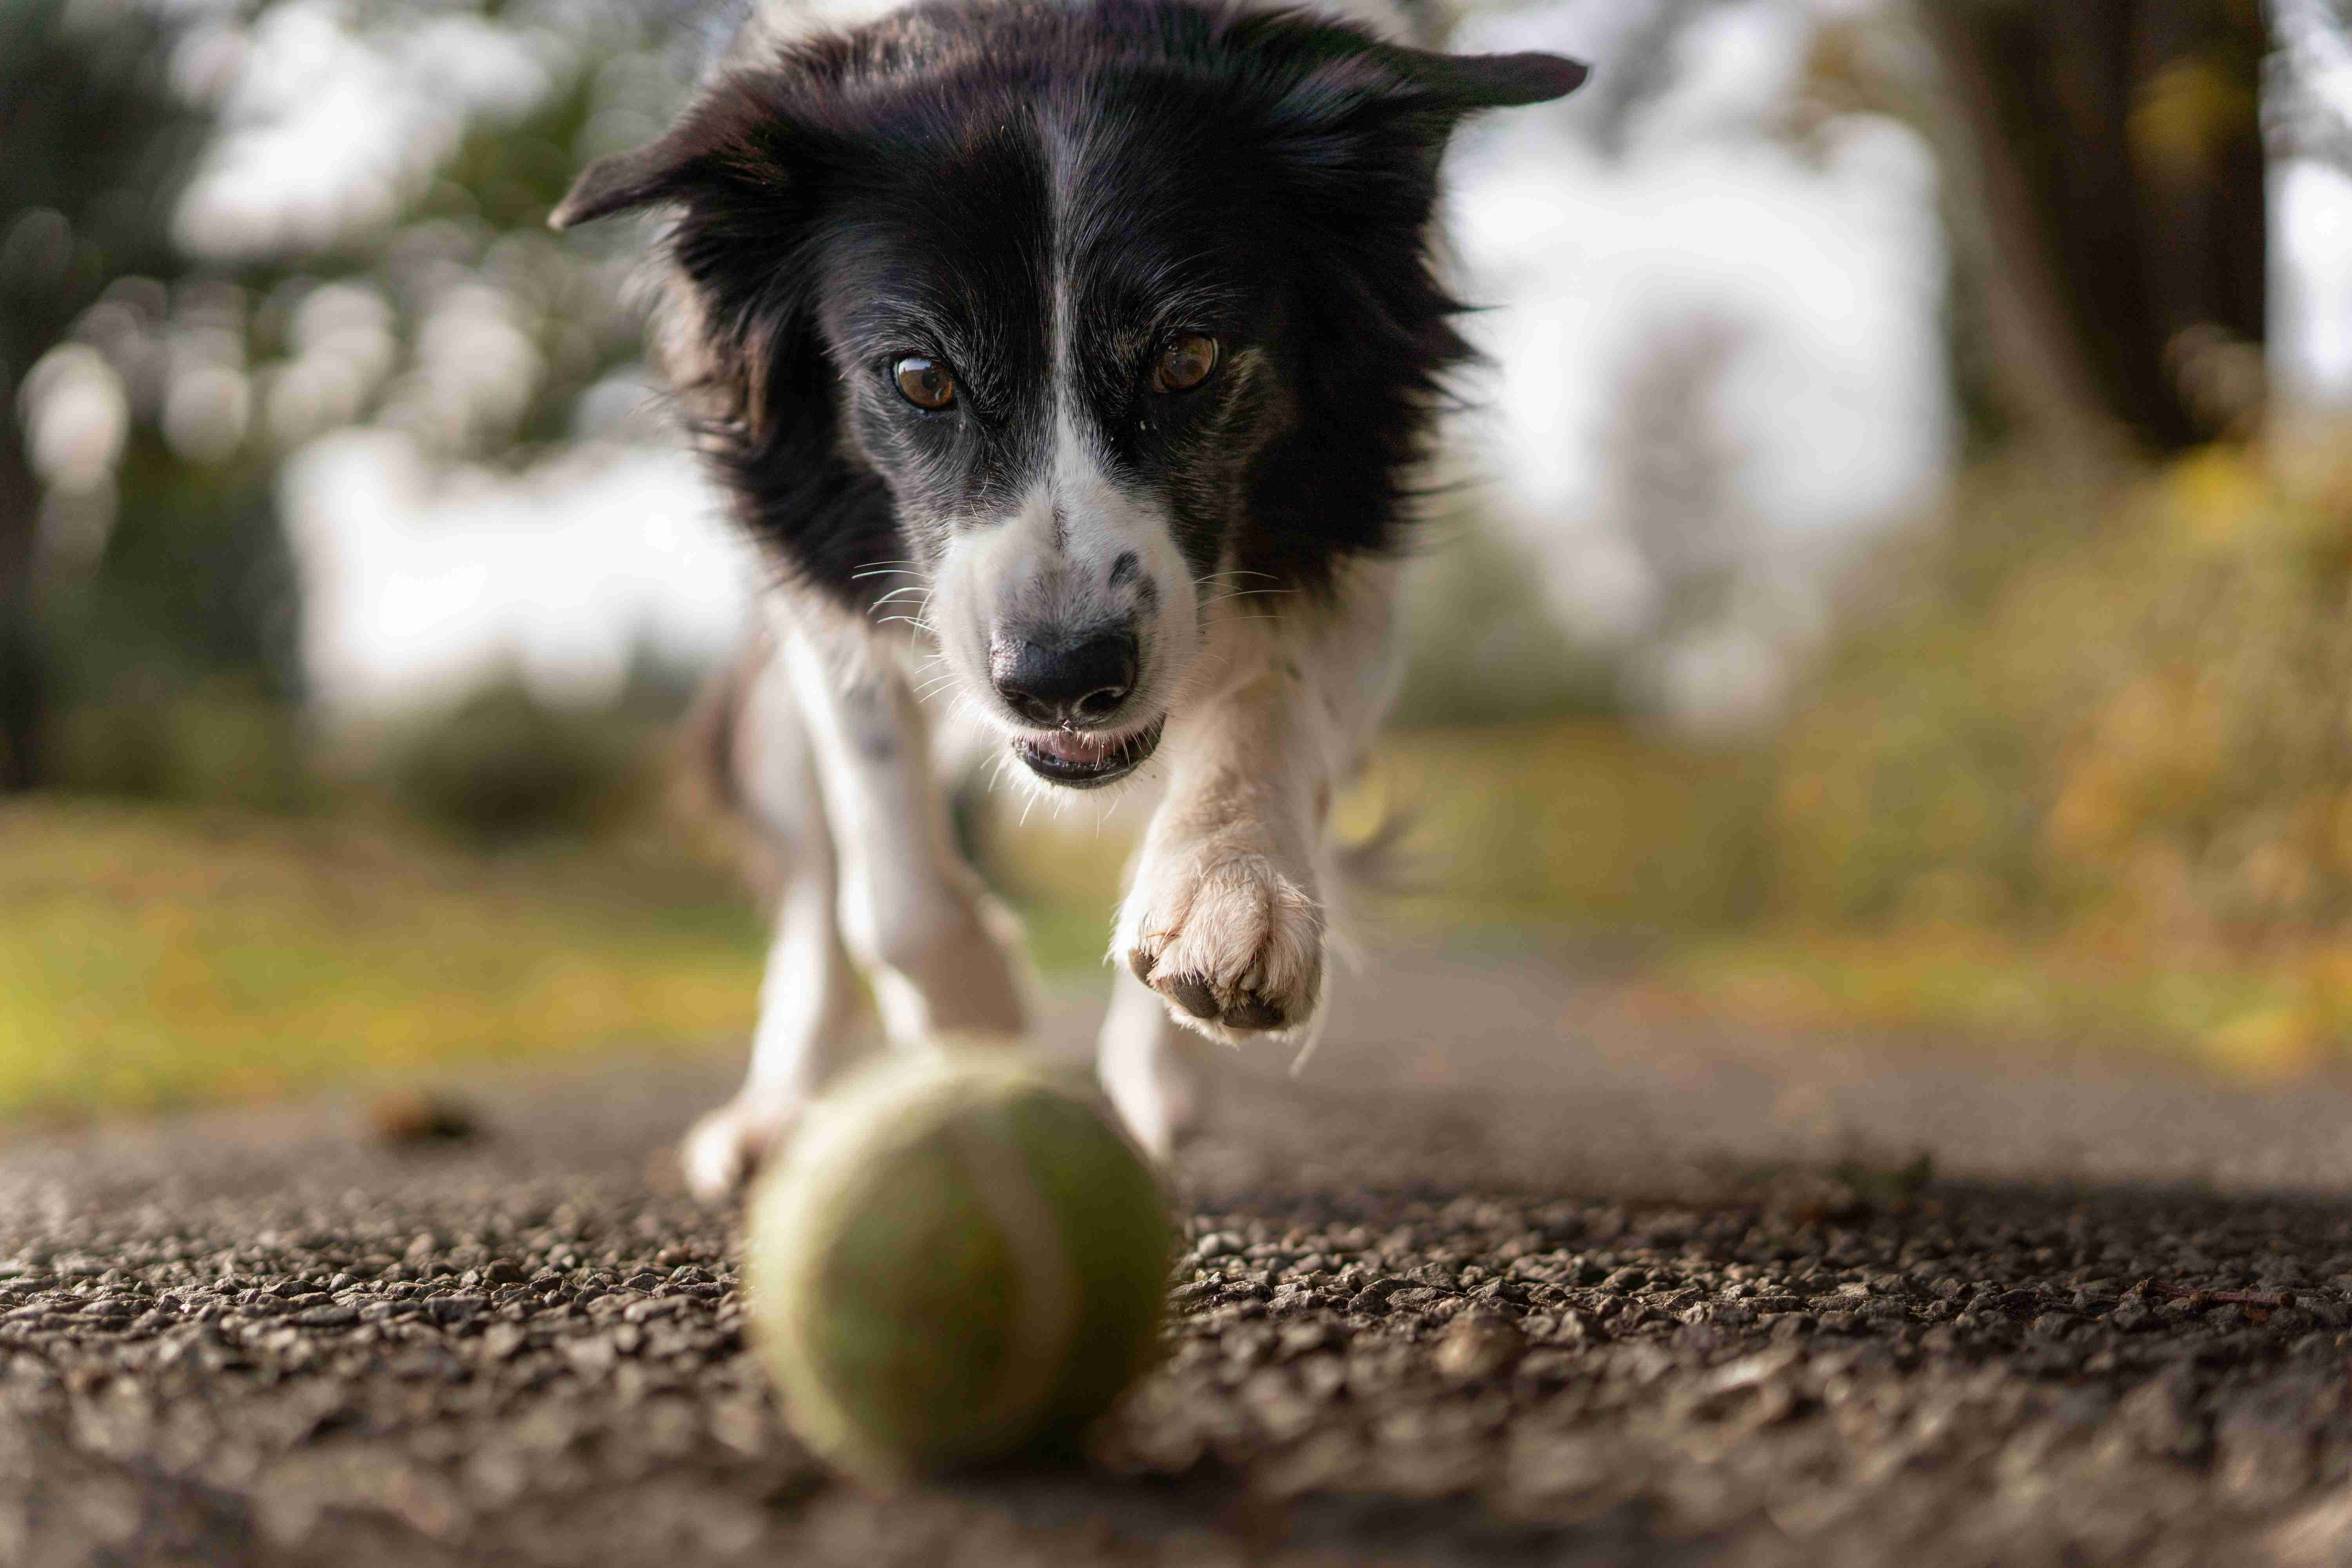 Teaching Your Border Collie Puppy to Stay: Easy Steps to Follow